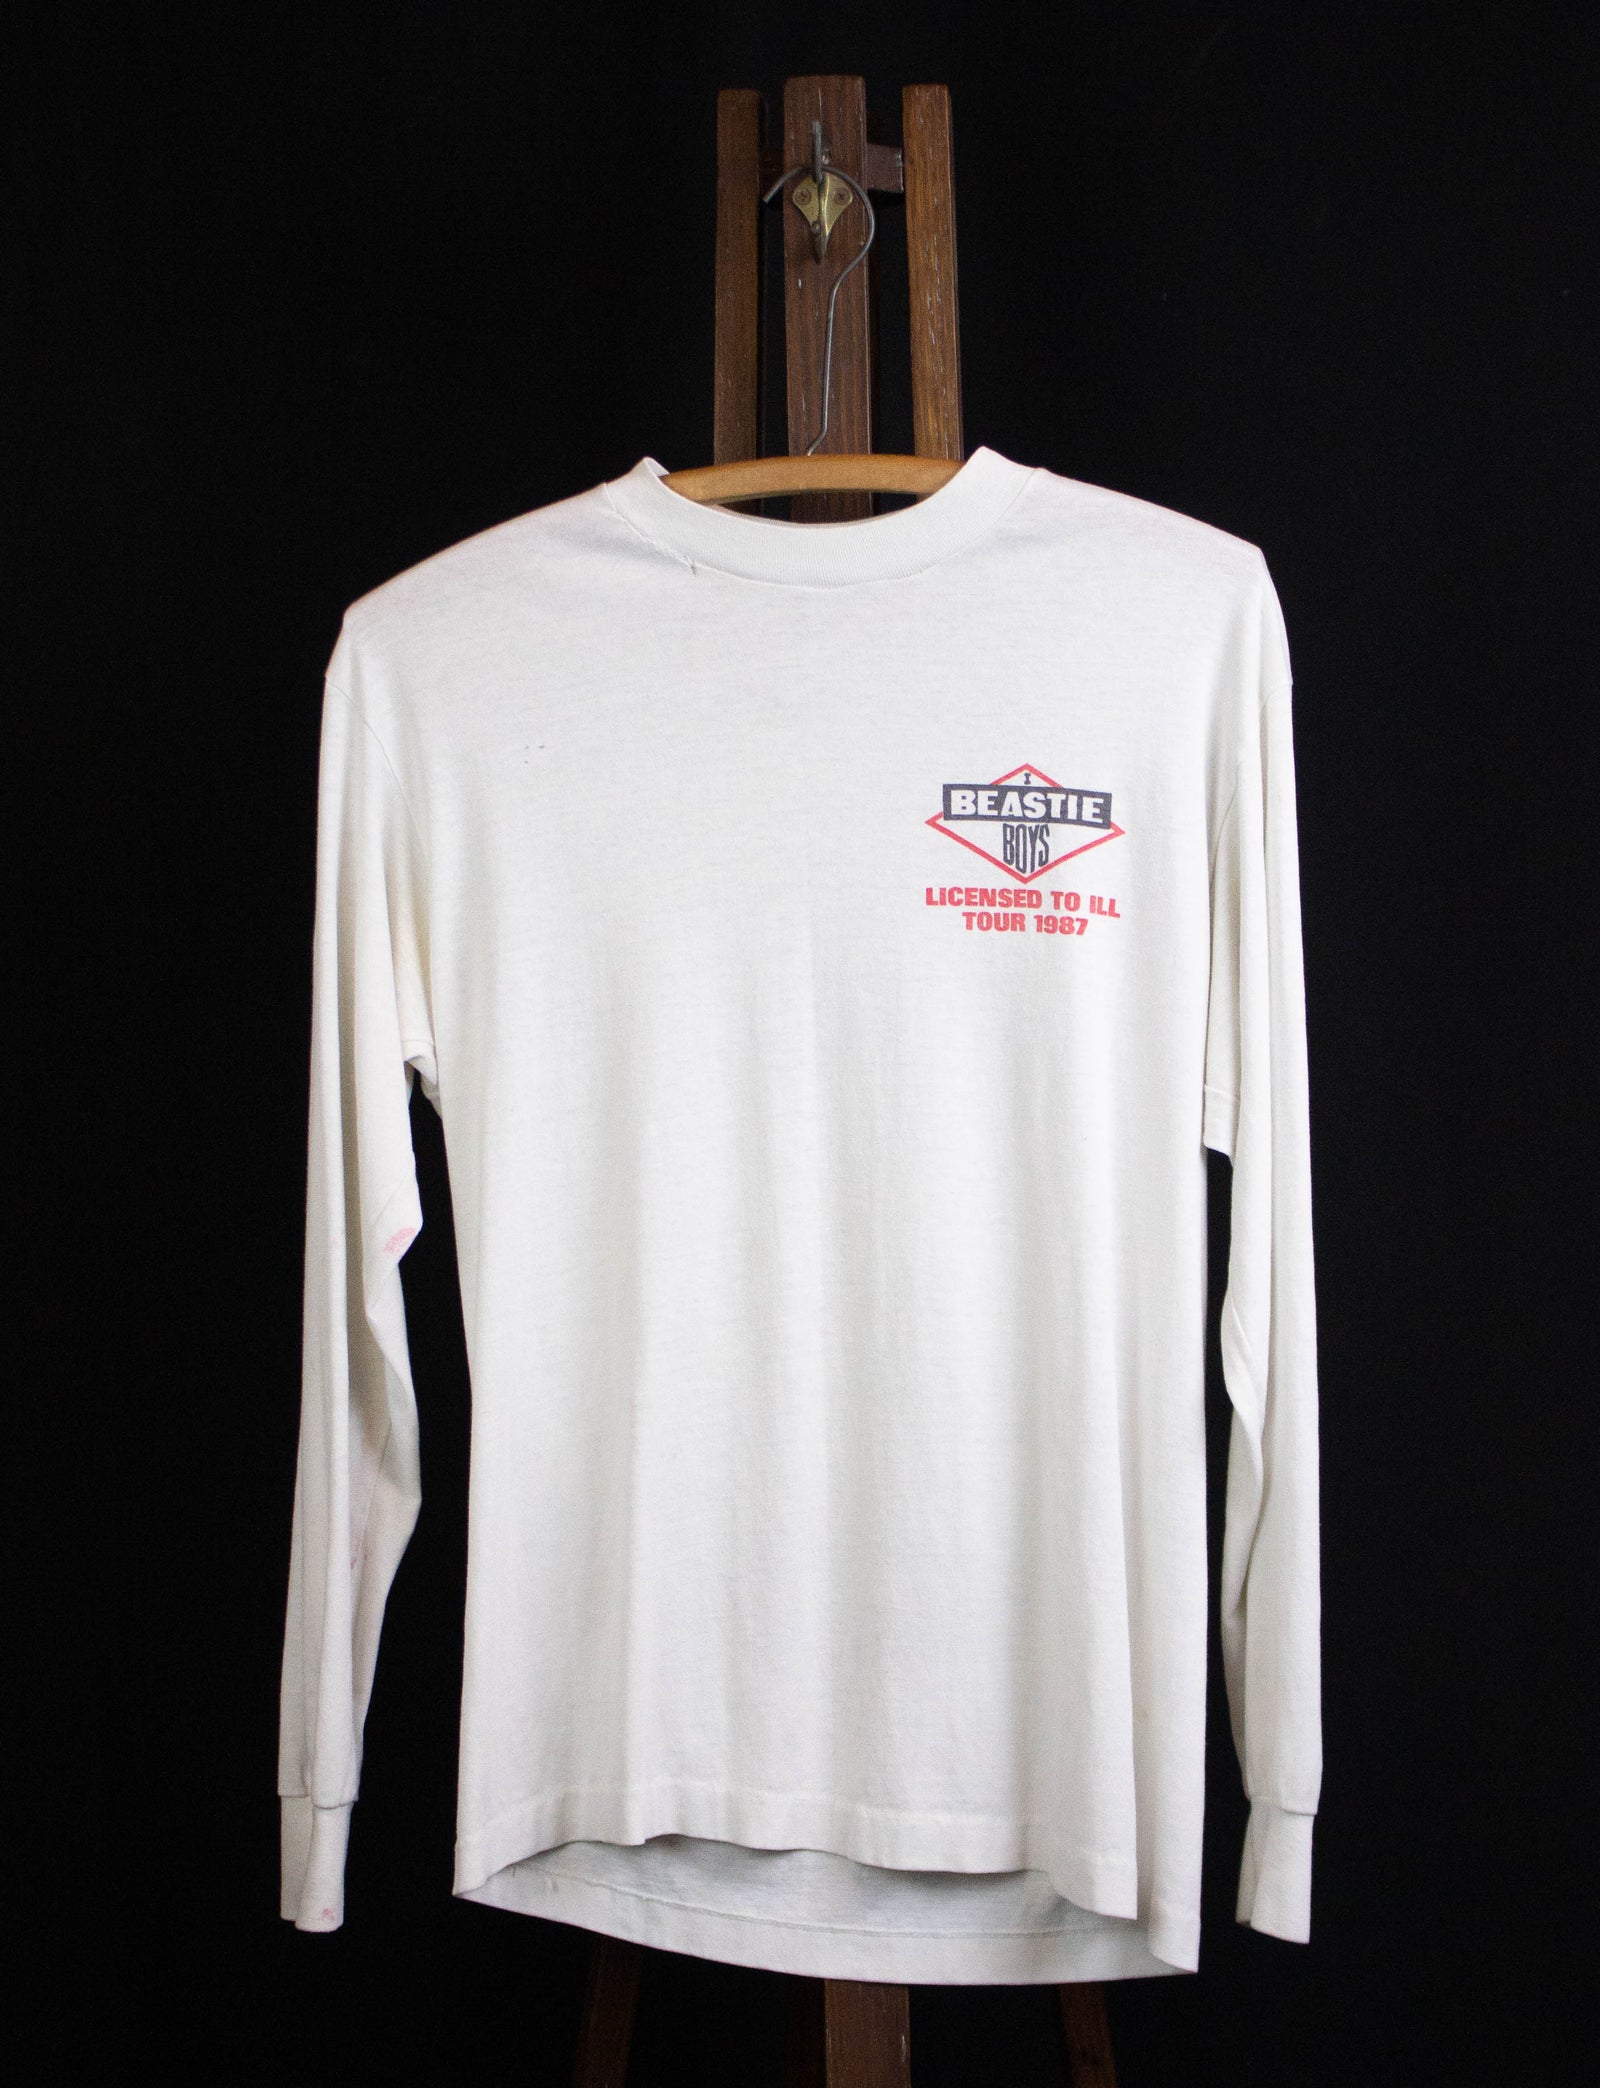 Vintage 1987 Beastie Boys Licensed To Ill Long Sleeve Concert T